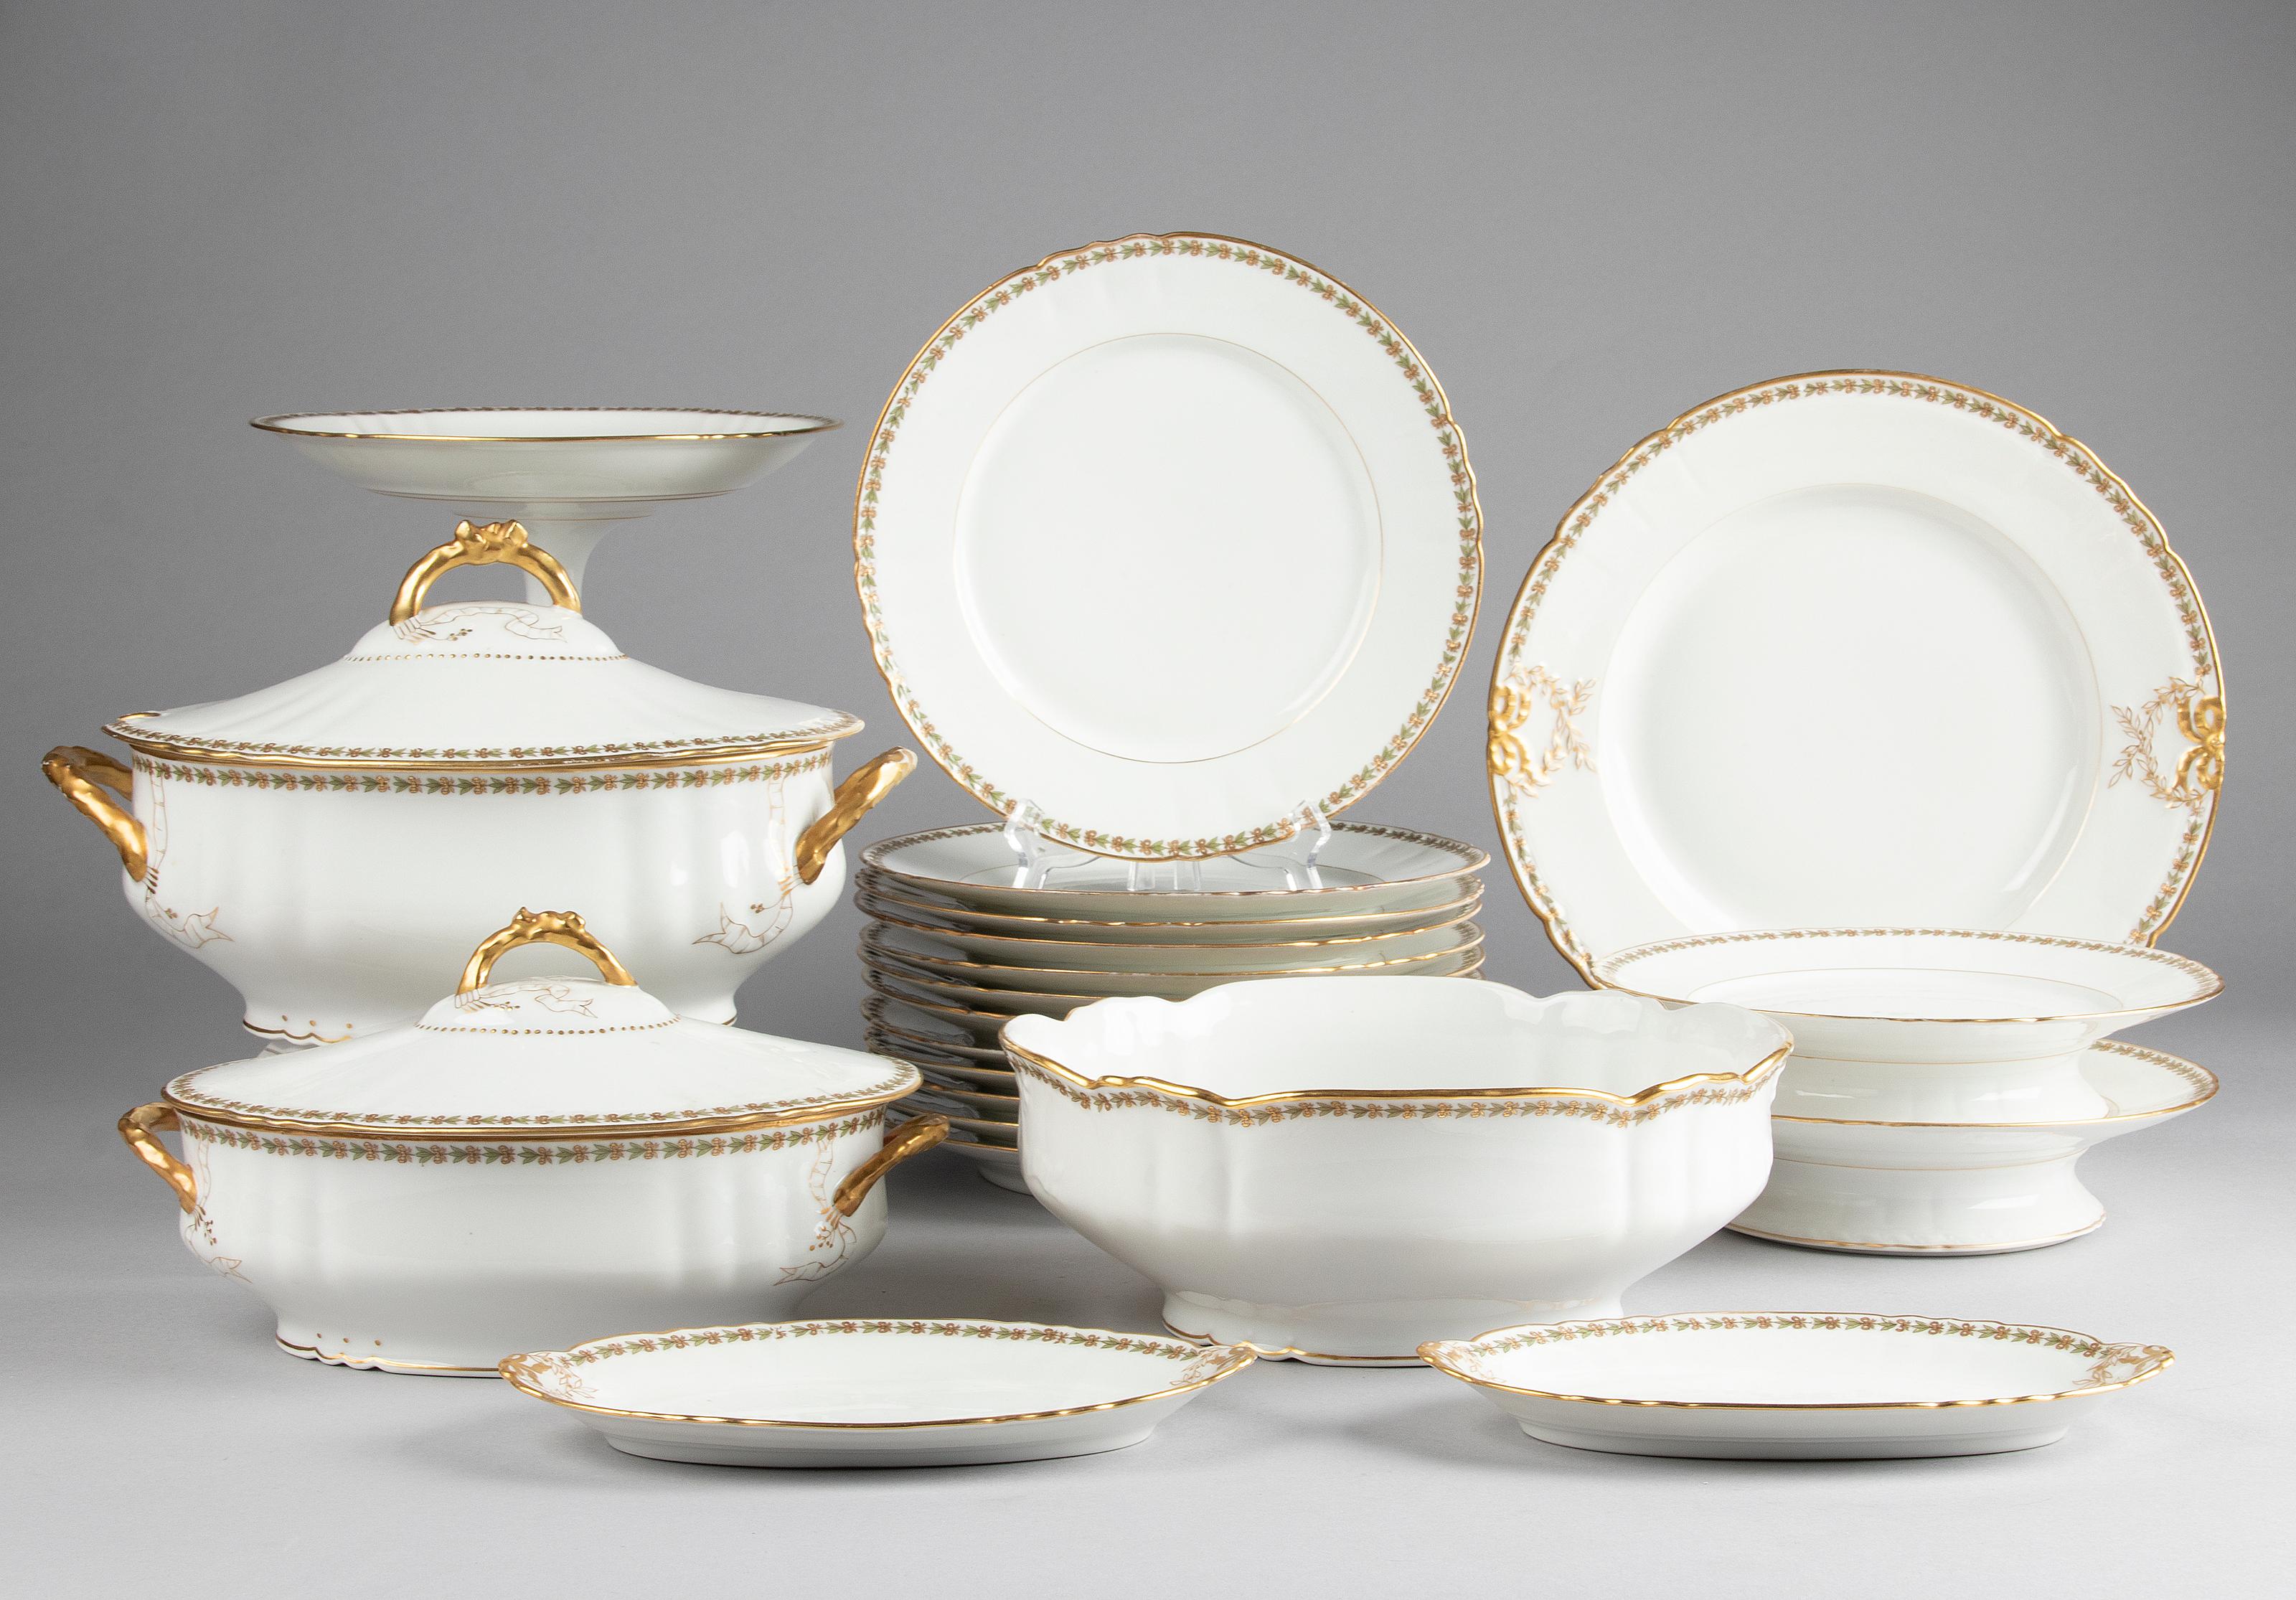 Beautiful set of porcelain tableware from the French brand Limoges. The porcelain is snow-white in colour, decorated with an elegant edge of leaves and ribbons and gold-coloured accents. The service dates from around 1930. The composition of the set